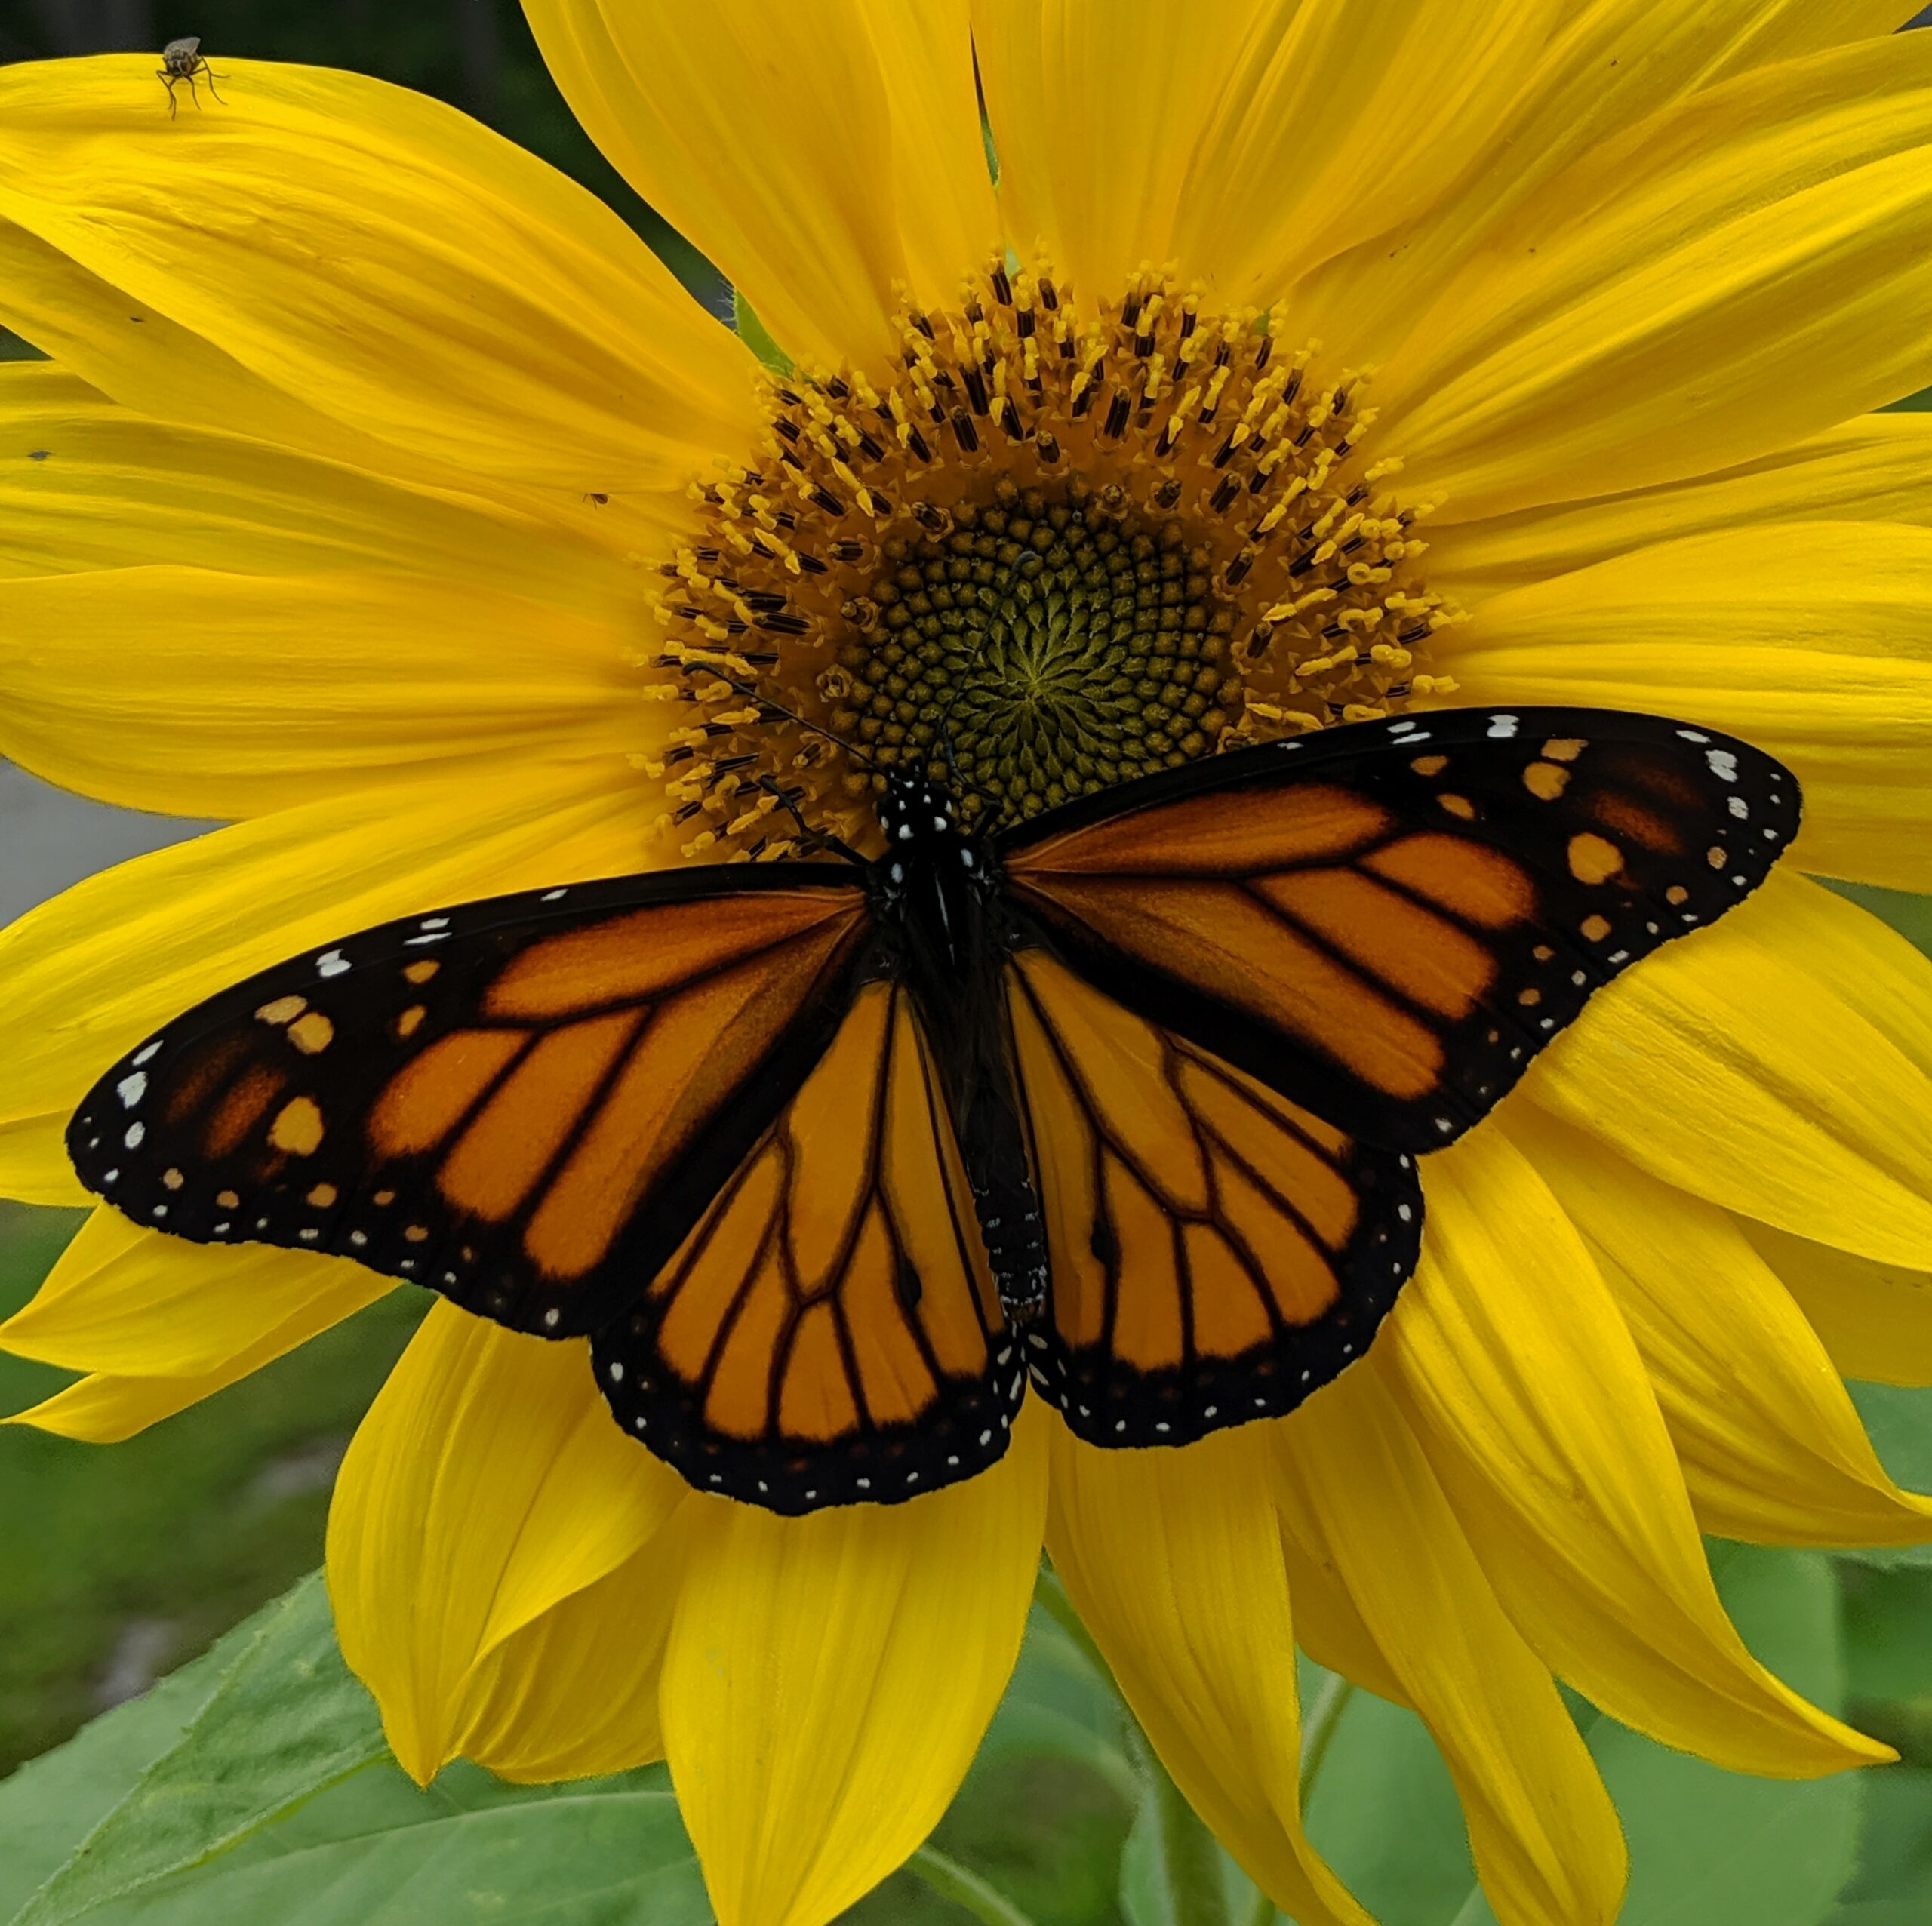 New Project: Promoting Pollinator Friendly Gardens